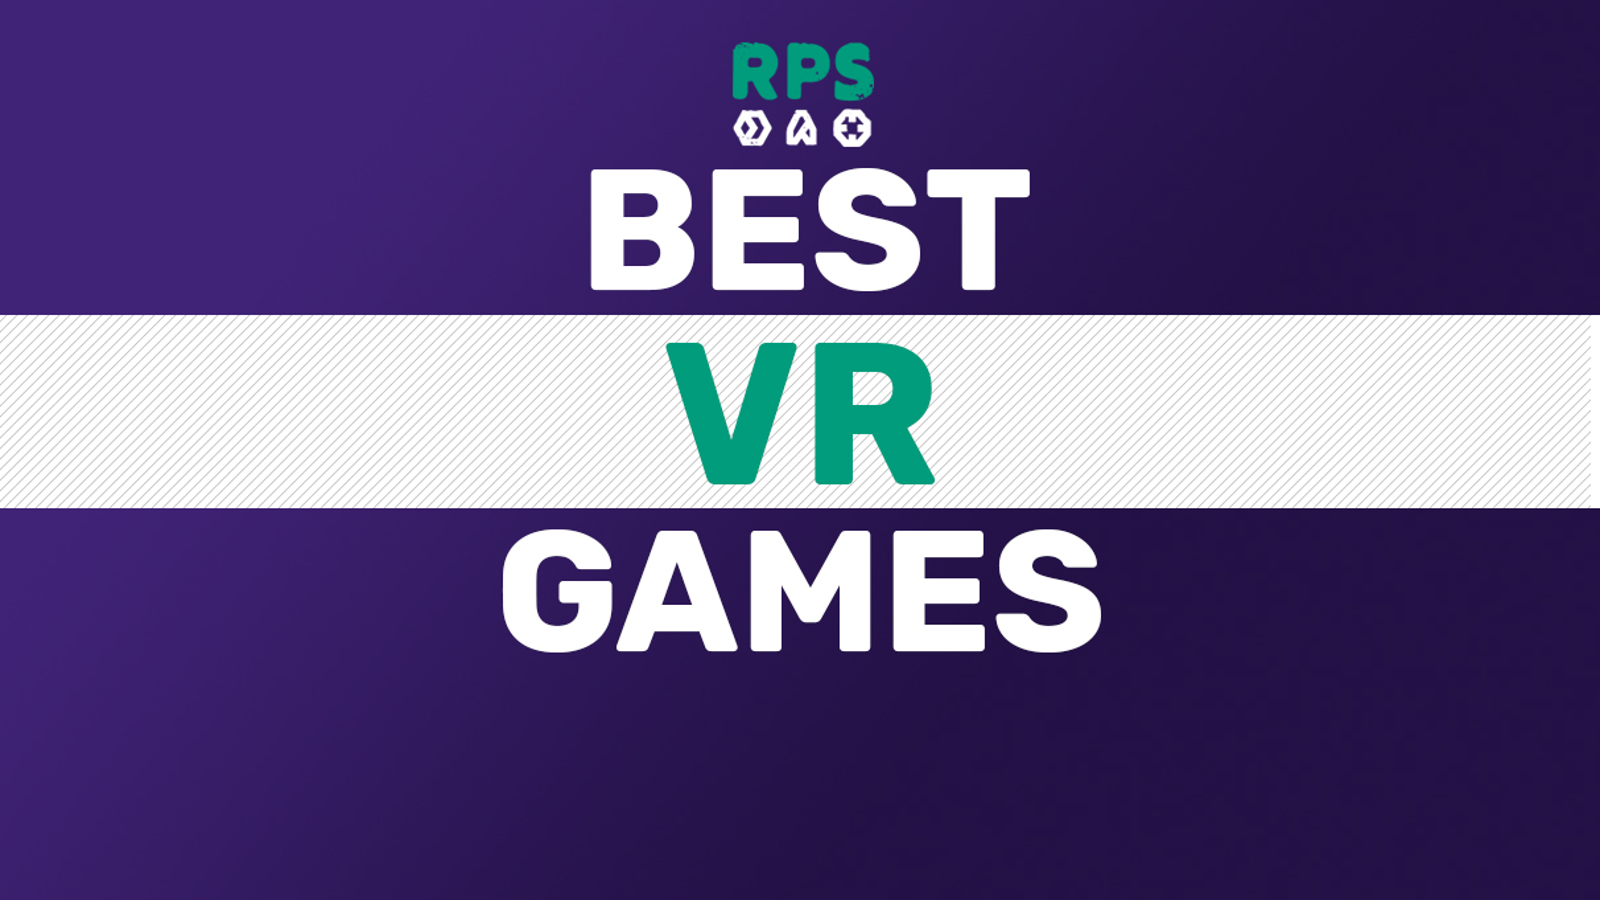 The 20 best VR games for Oculus, Index and Vive